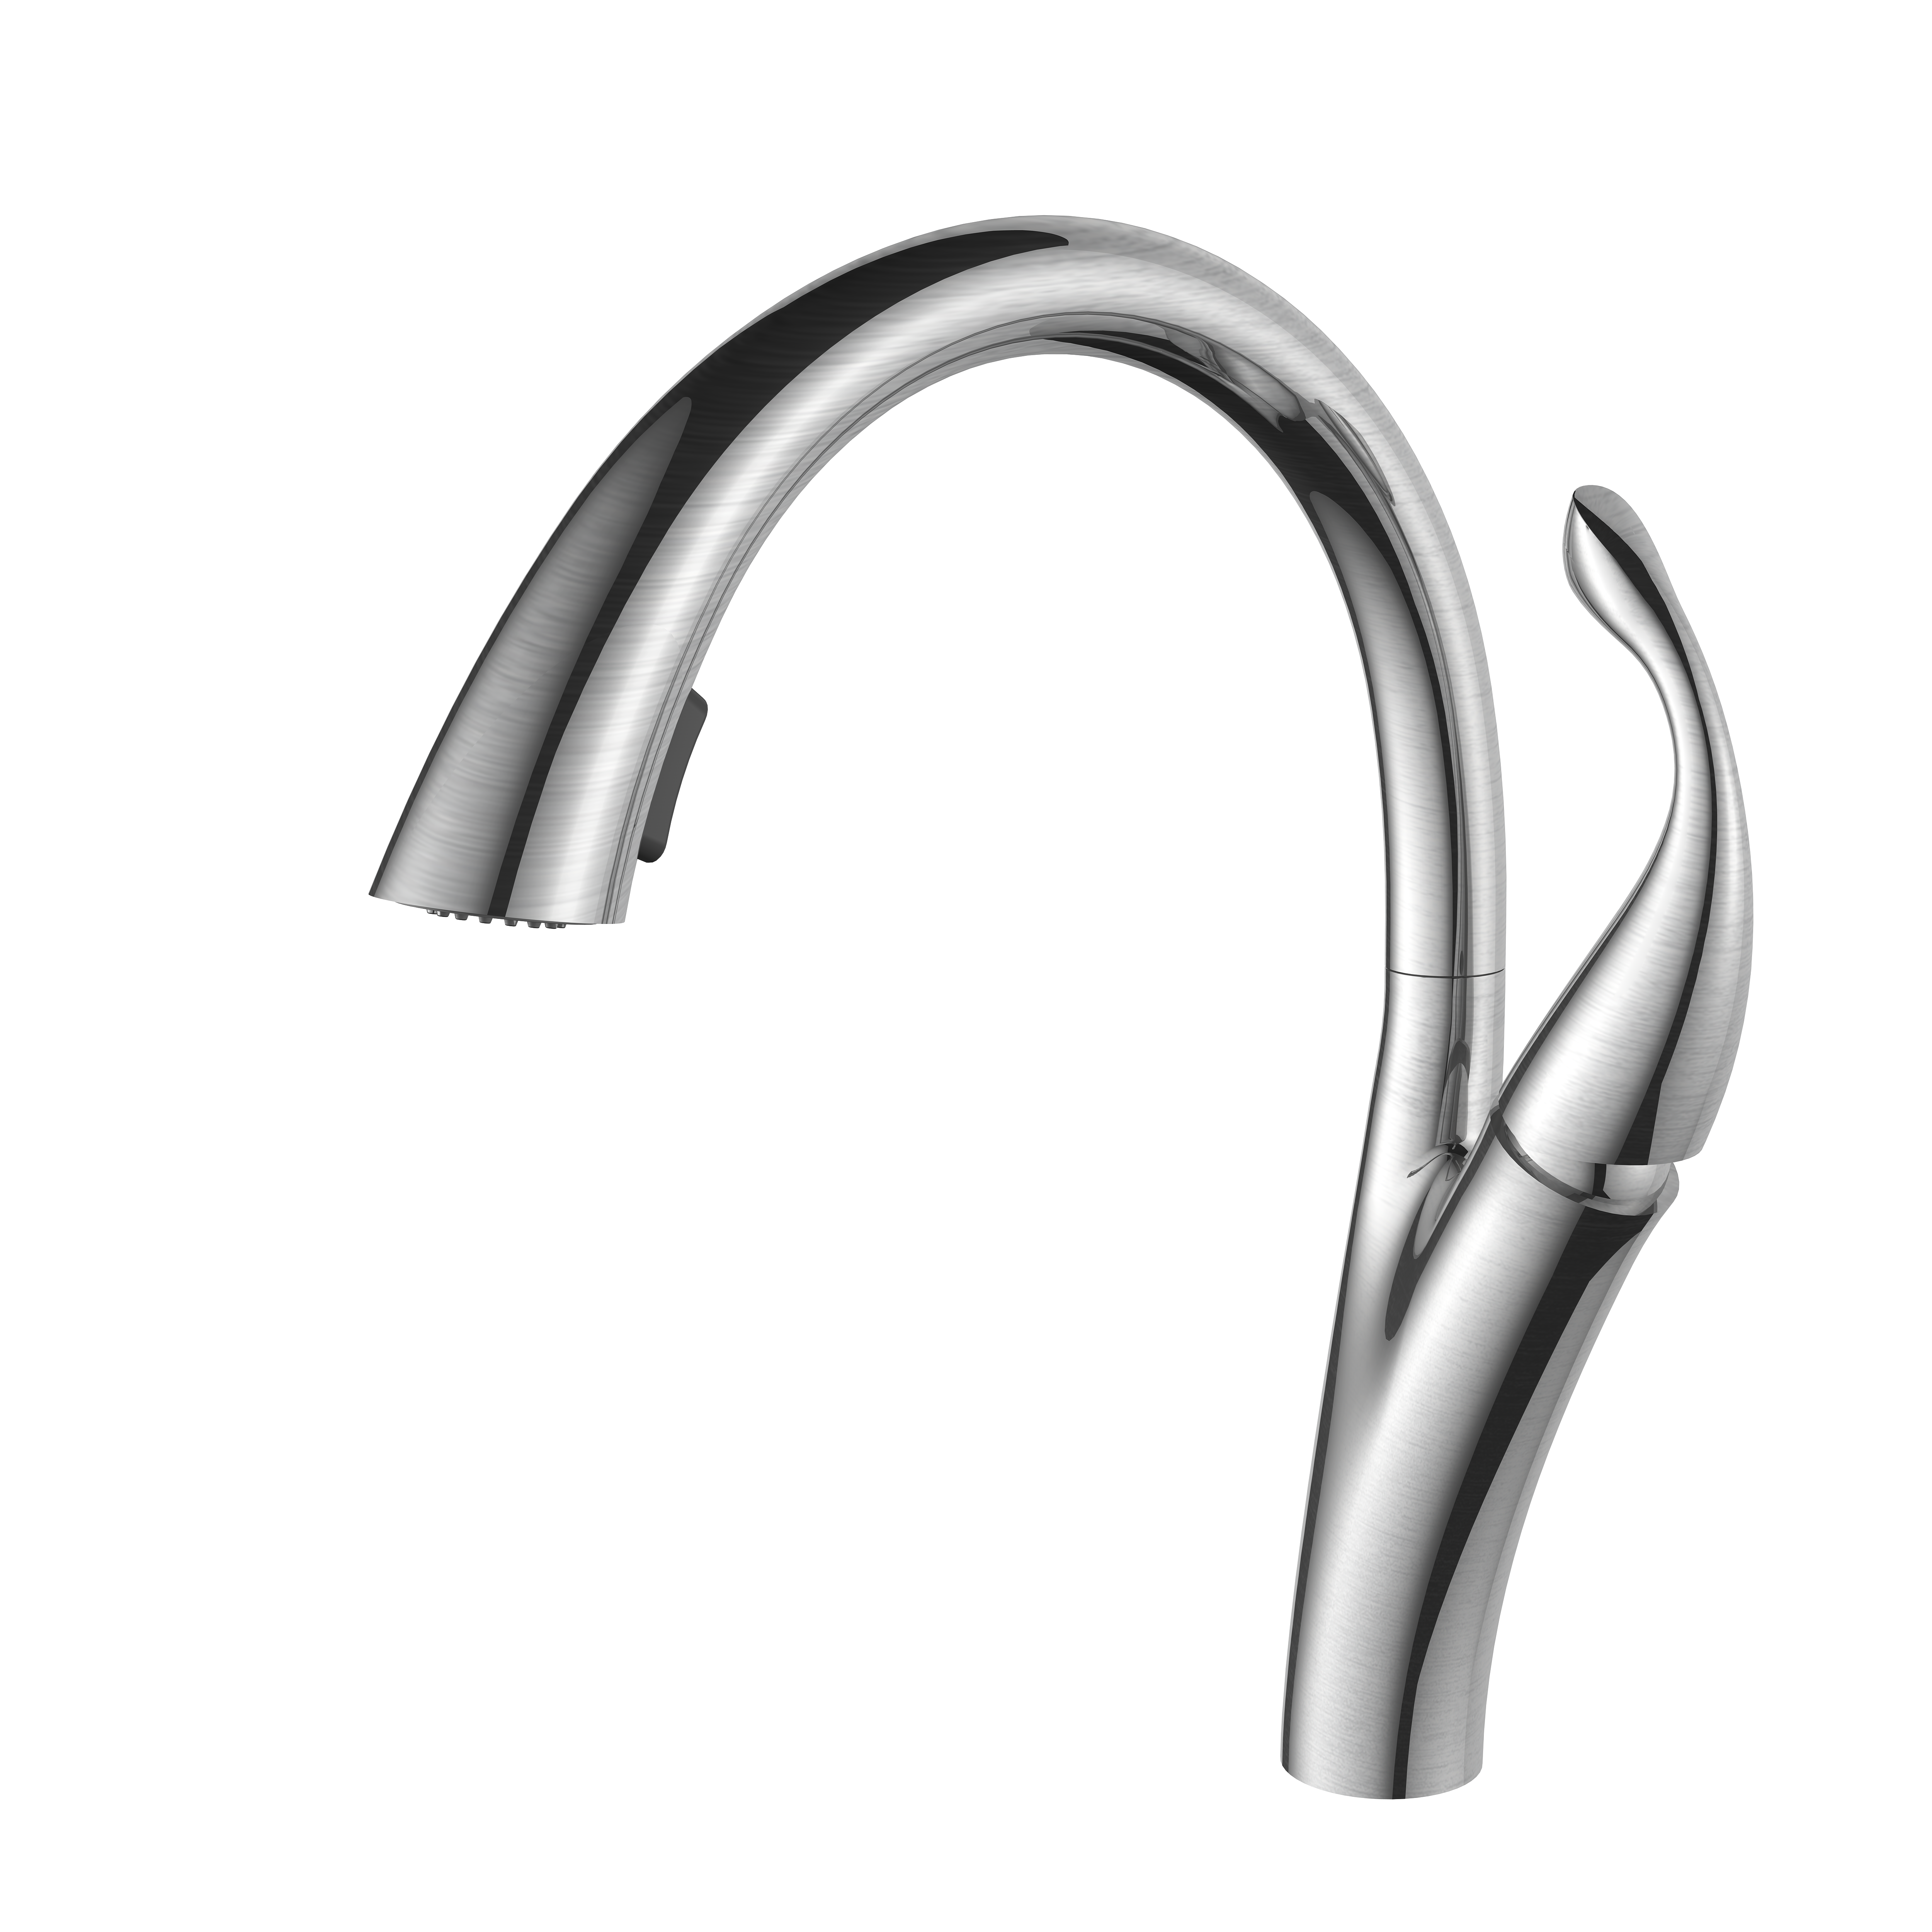 Brushed Nickel Brass Material Pull Down Kitchen Faucet Mixer